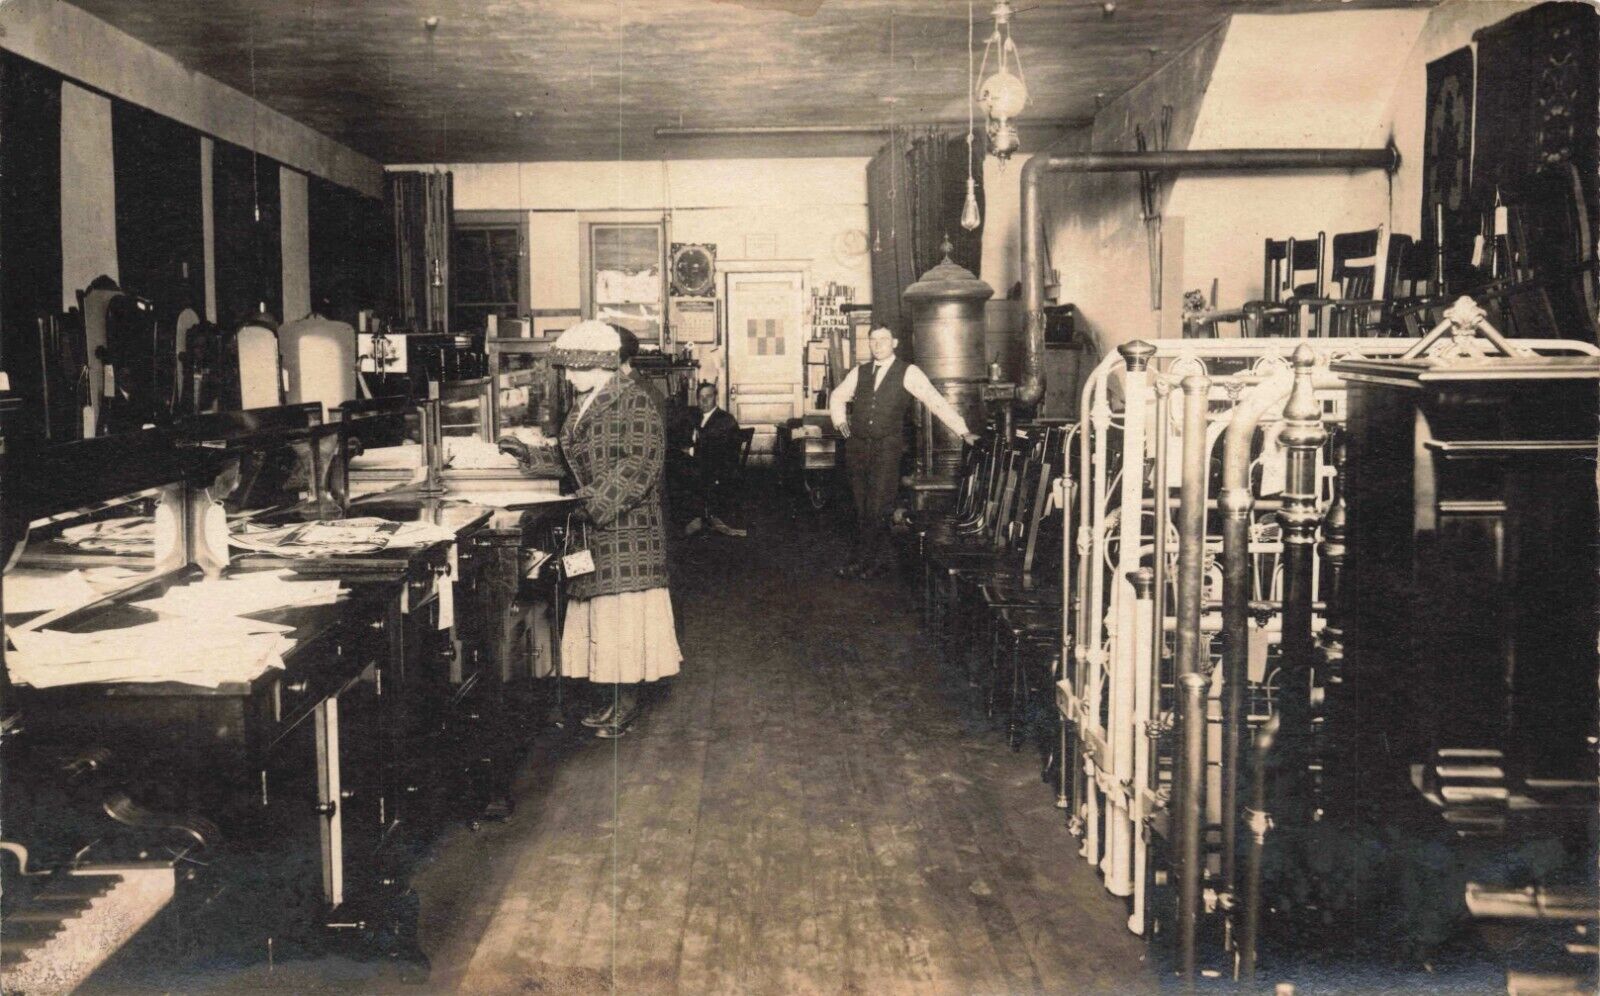 MN-Plymouth, Minnesota-RPPC-Interior view of a Furniture Store c1915 A36